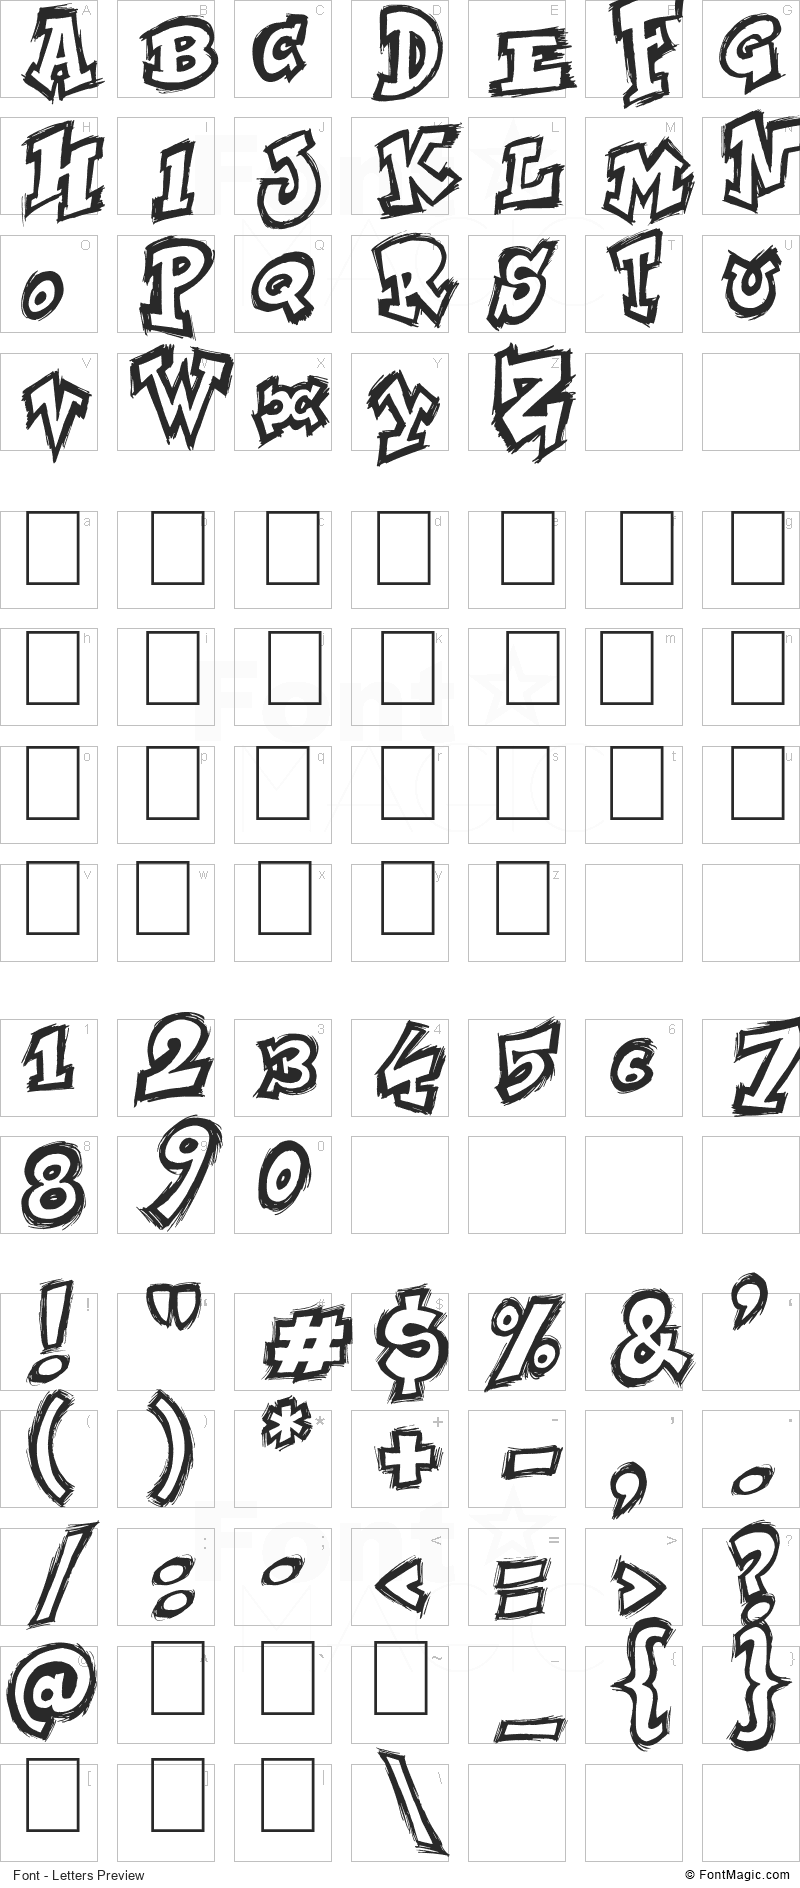 NYC Zone 123 Font - All Latters Preview Chart